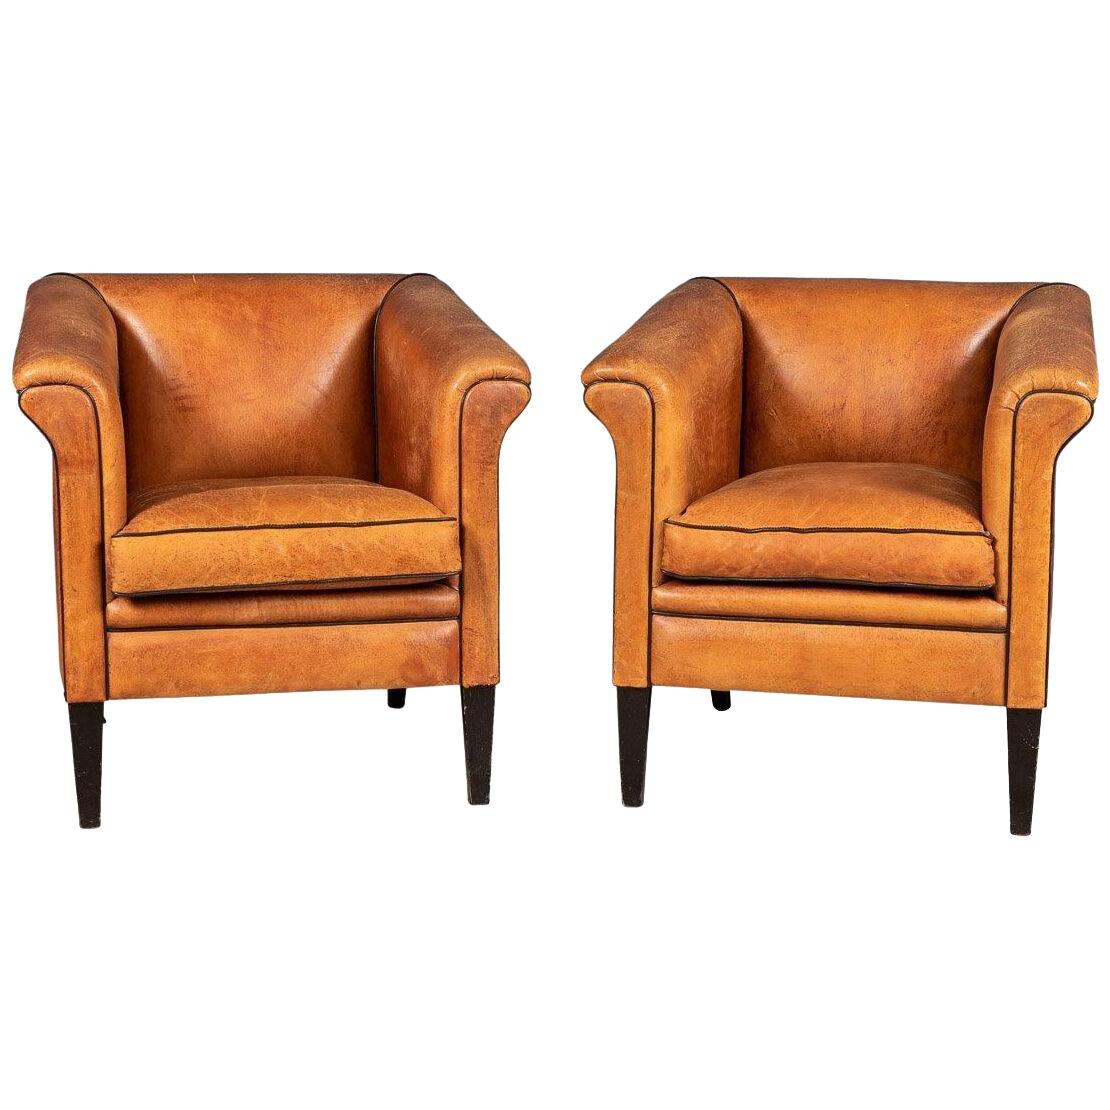 Late 20th Century Pair Of Art Deco Style Dutch Sheepskin Leather Club Chairs